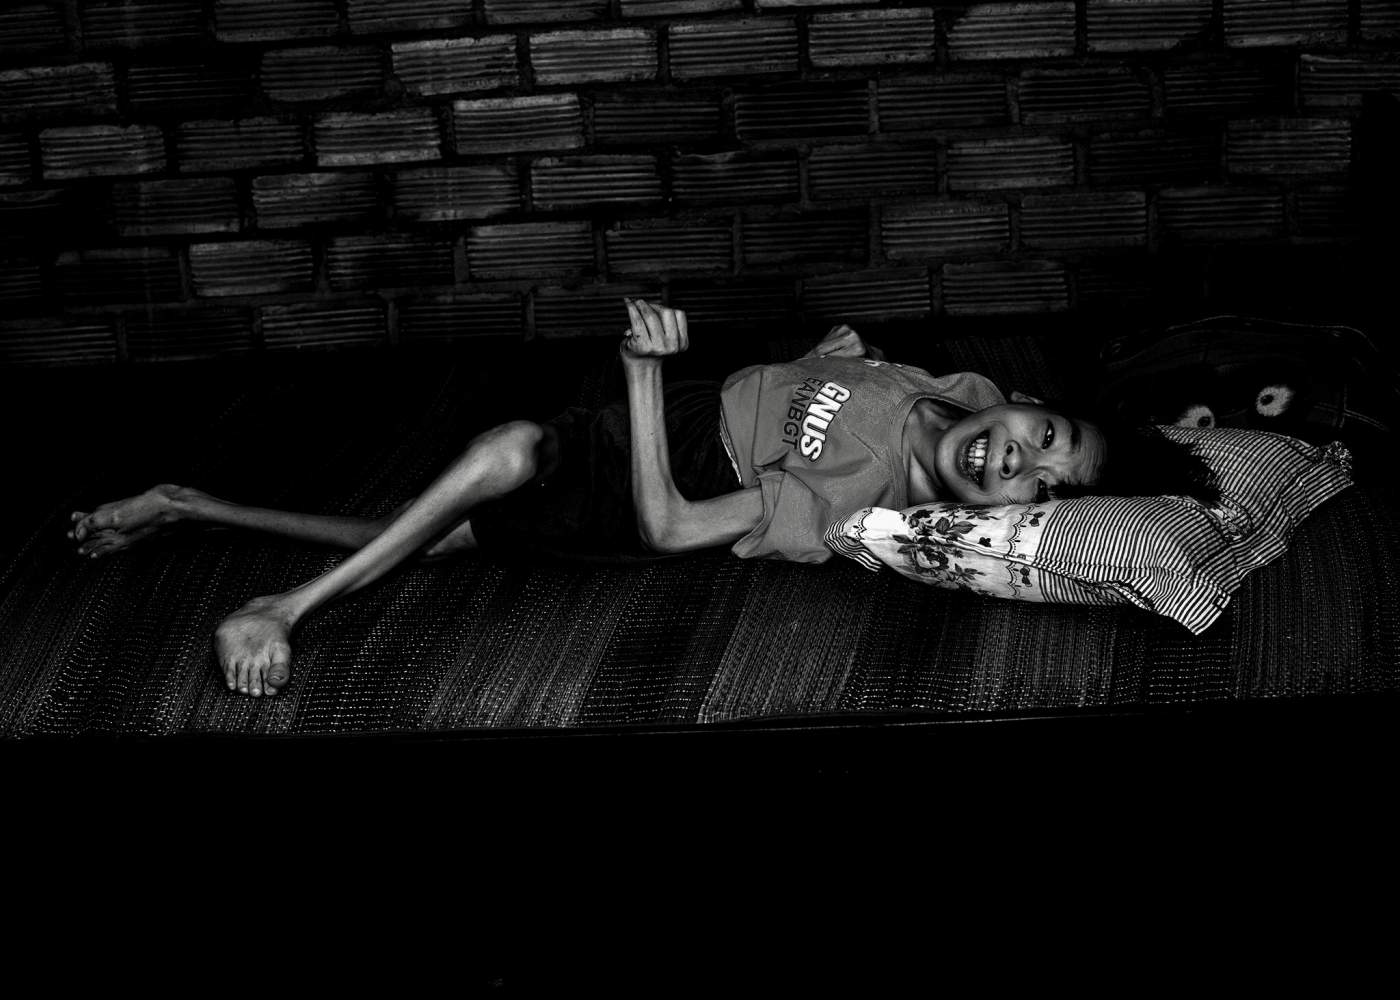 A child severely disabled from Agent Orange